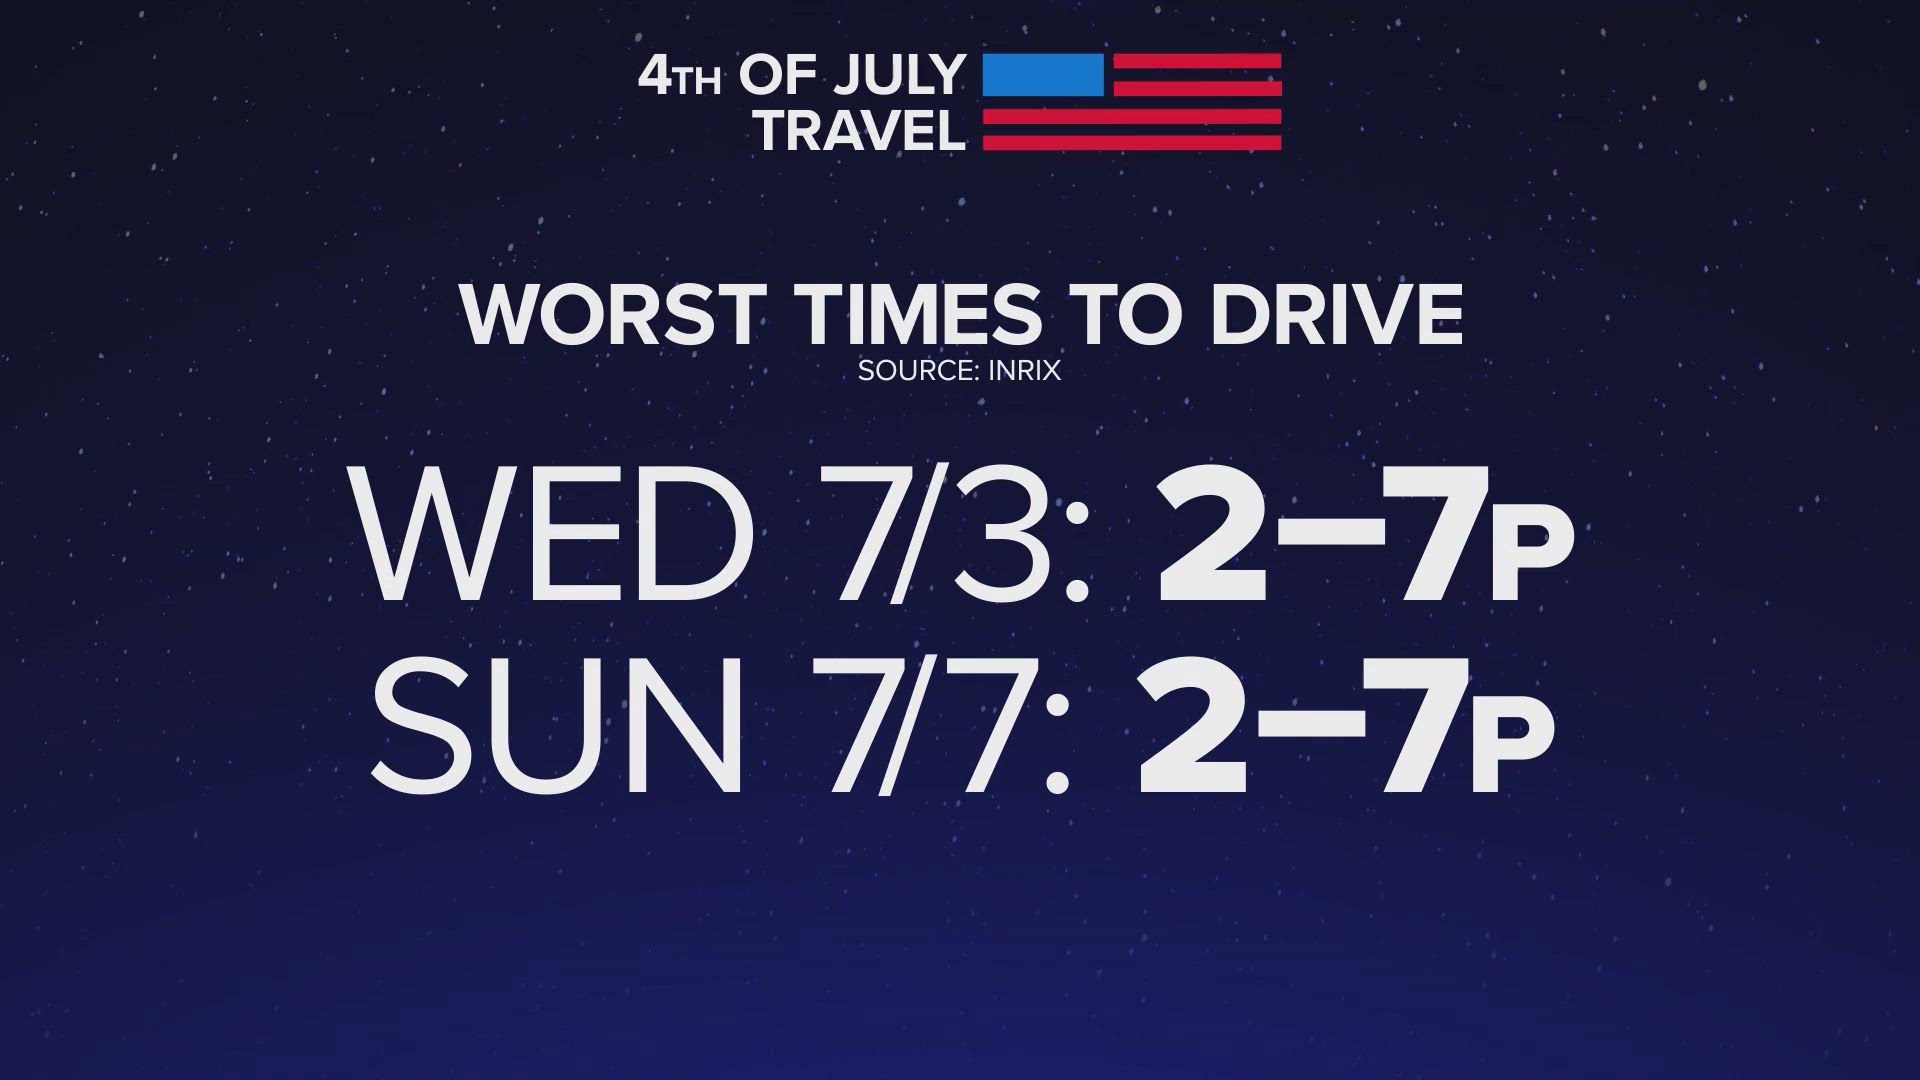 A lot of Texans are expected to hit the roadway this Fourth of July holiday.